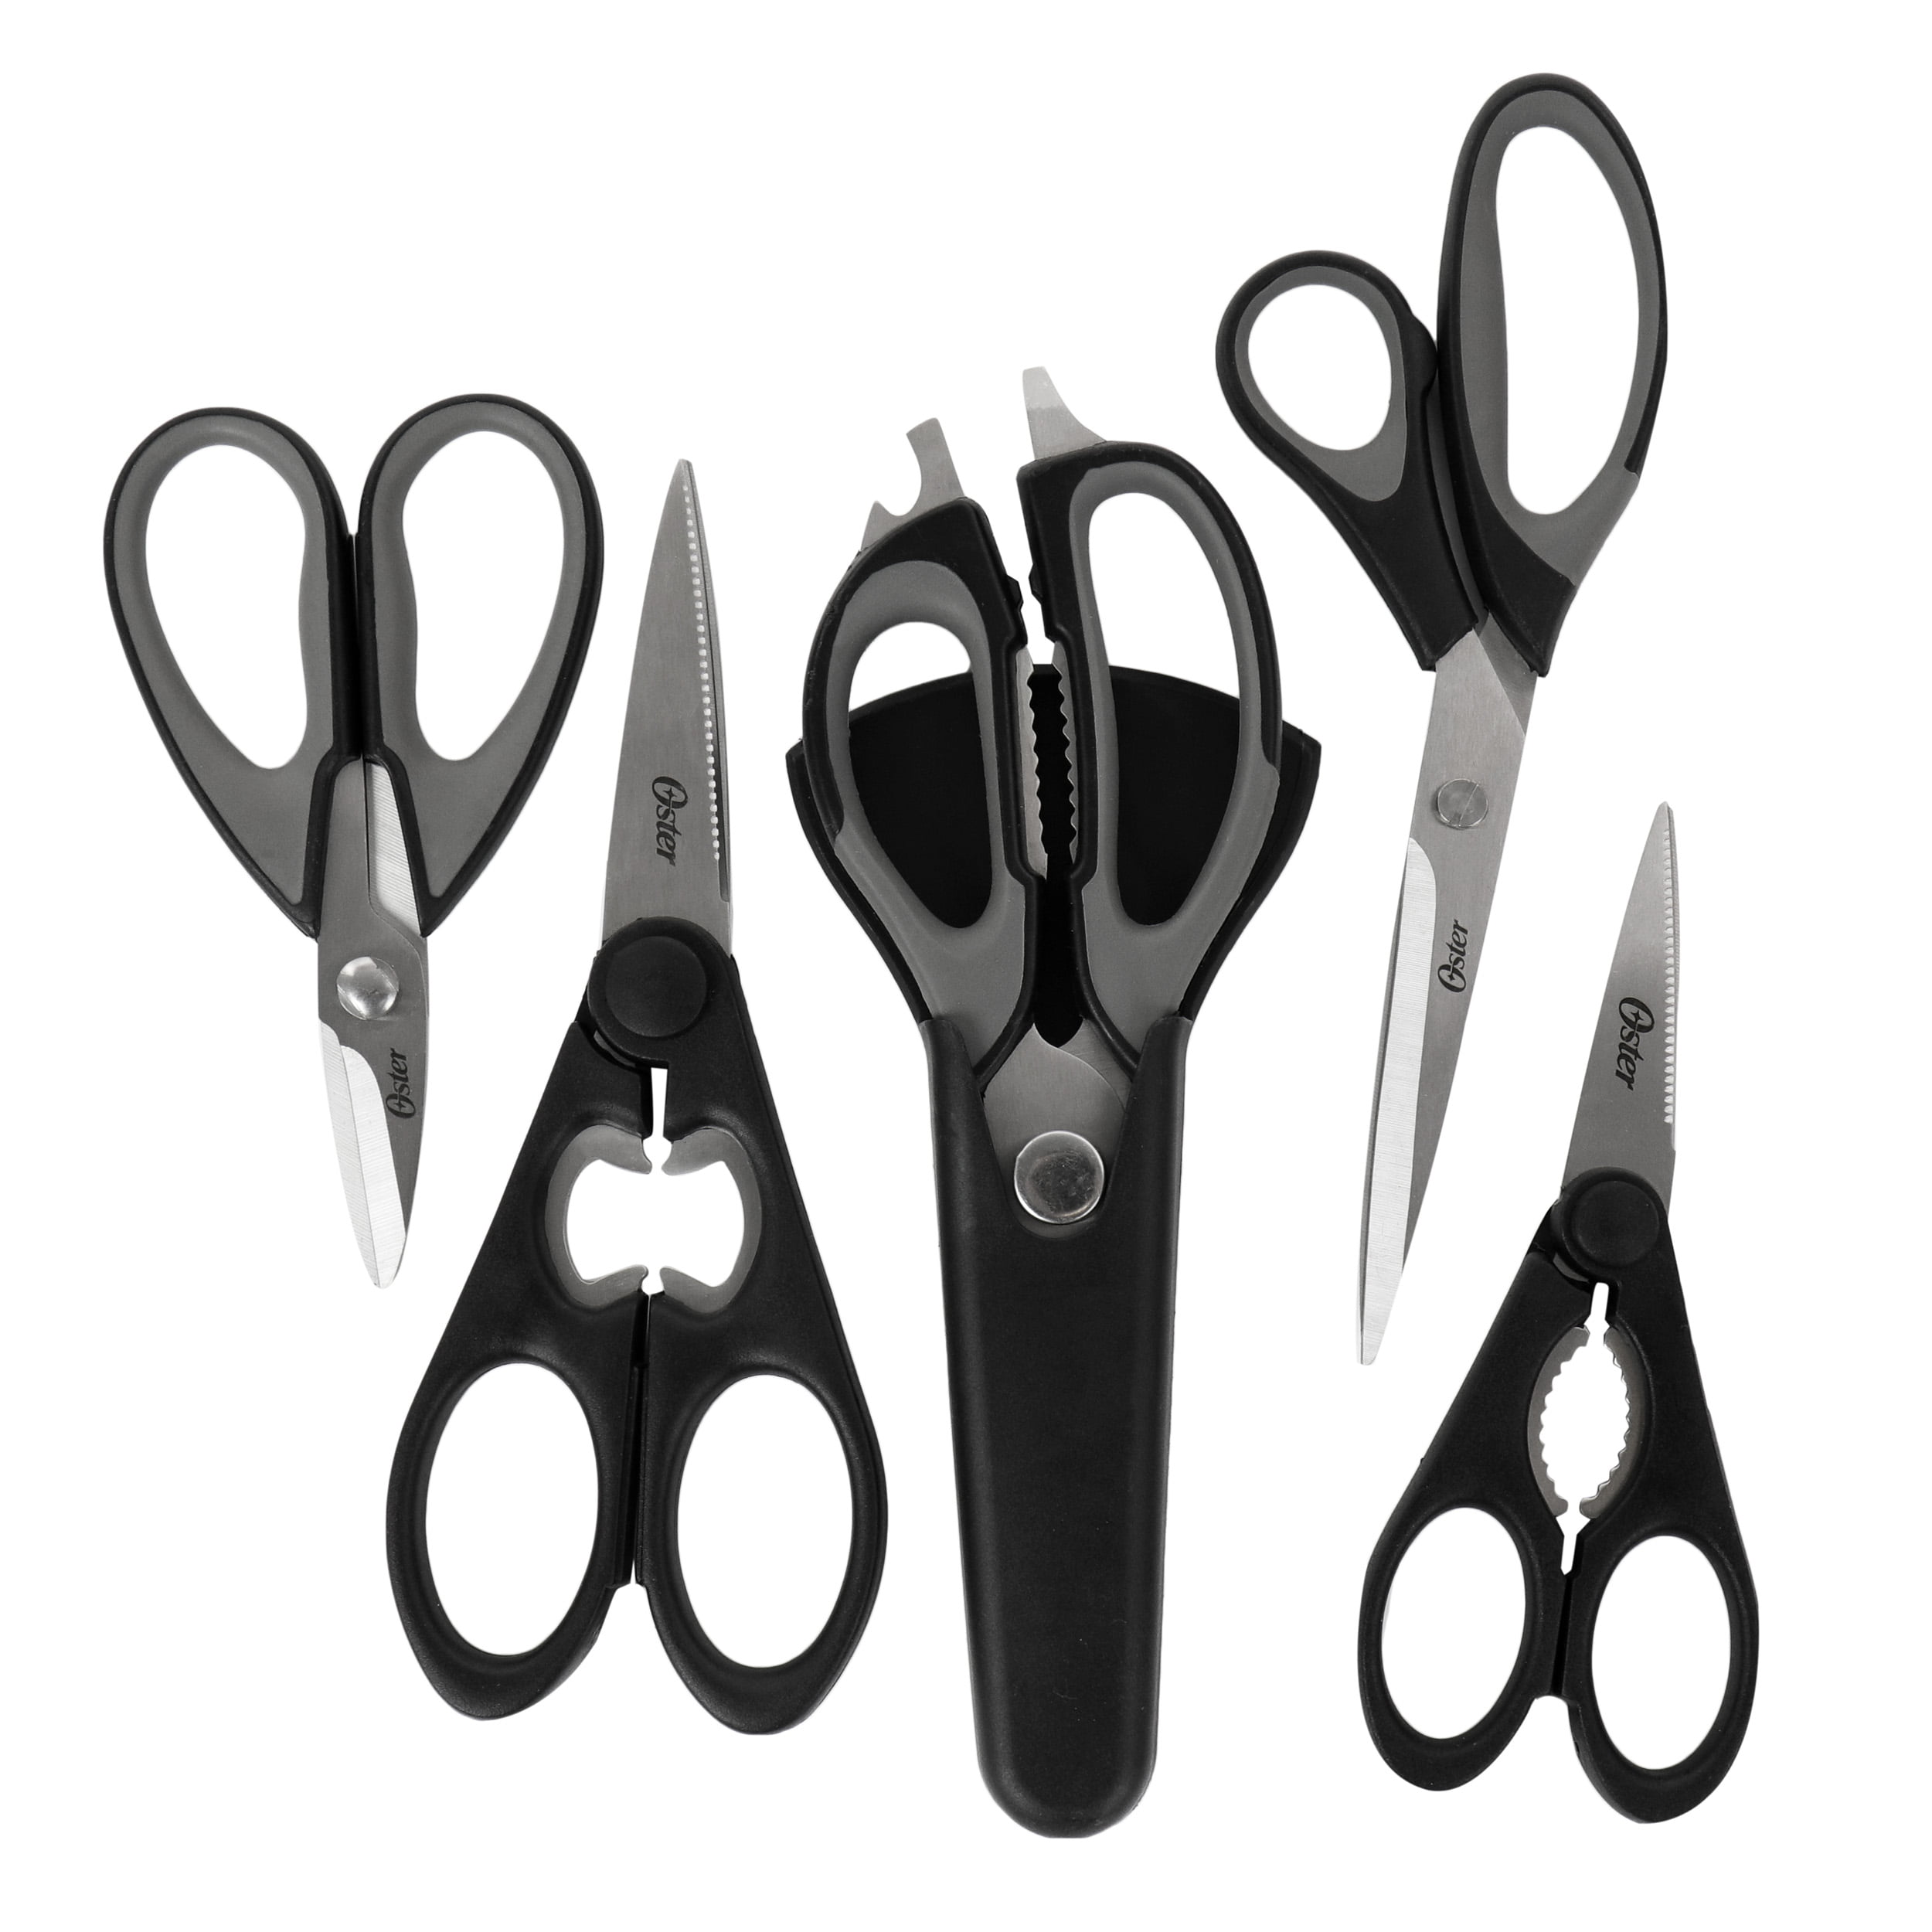 Multi-functional Kitchen Gadget Set of 6 Pcs with Storage Seat Kitchen  Scissors Bottle Opener Cooking Utensils Set Fruit Complementary Food Tool